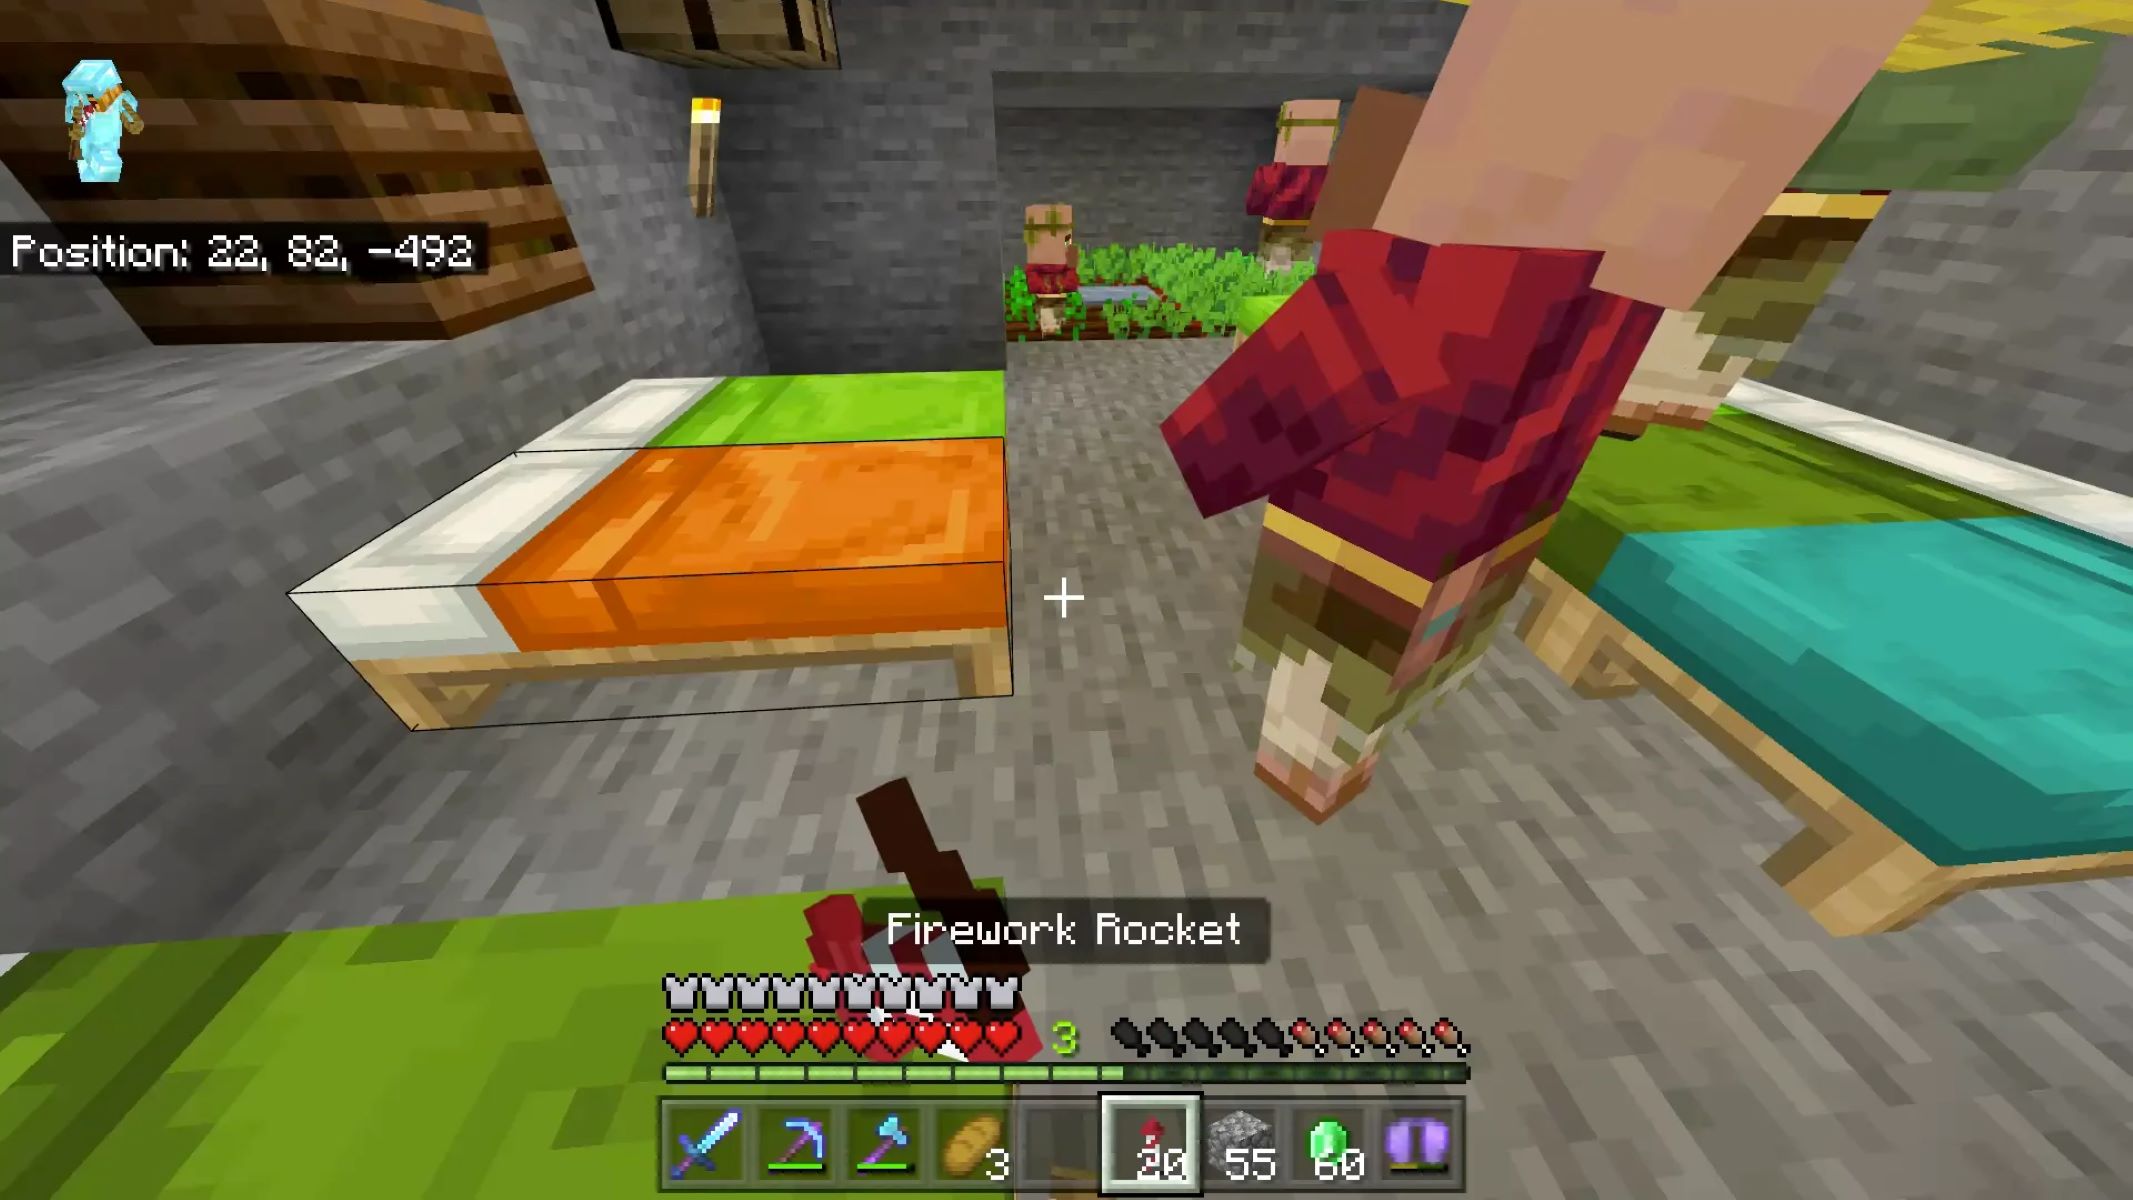 Minecraft Villagers Disappear After Trading, But One Stays - What's The Secret?